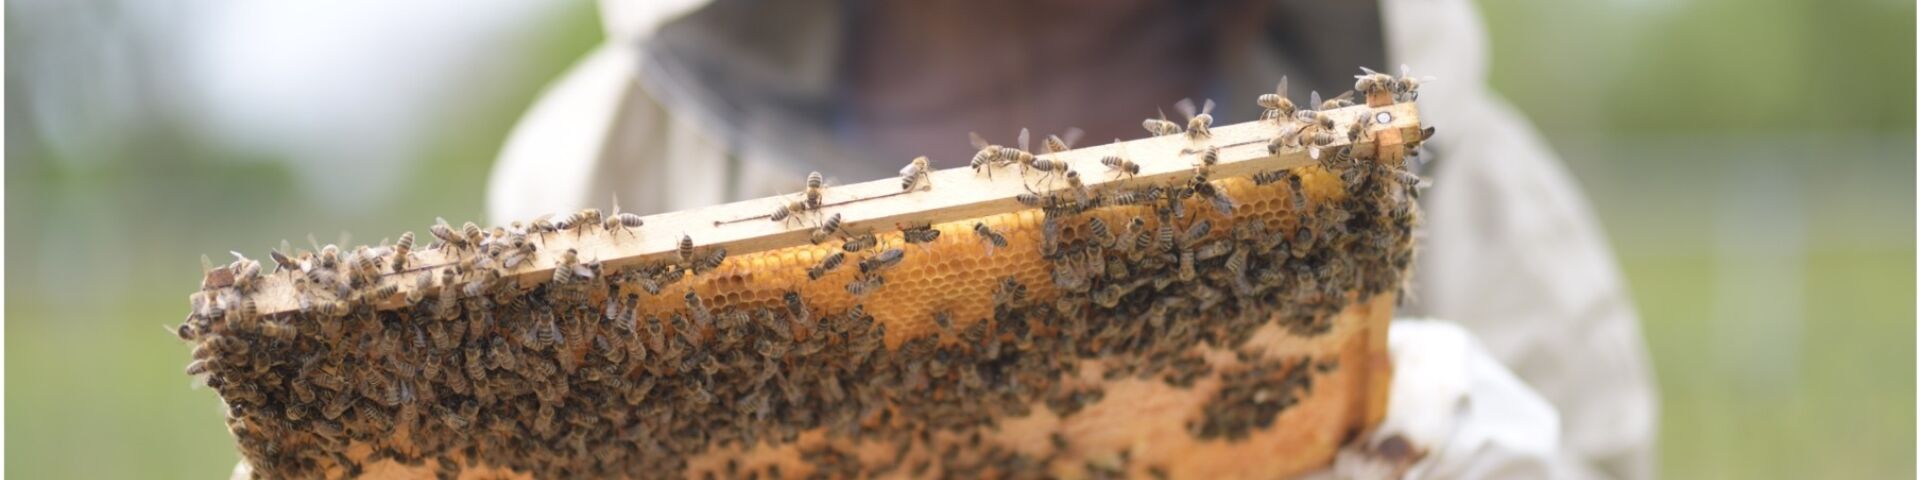 Beekeeper holding a bee hive frame, inspecting it.